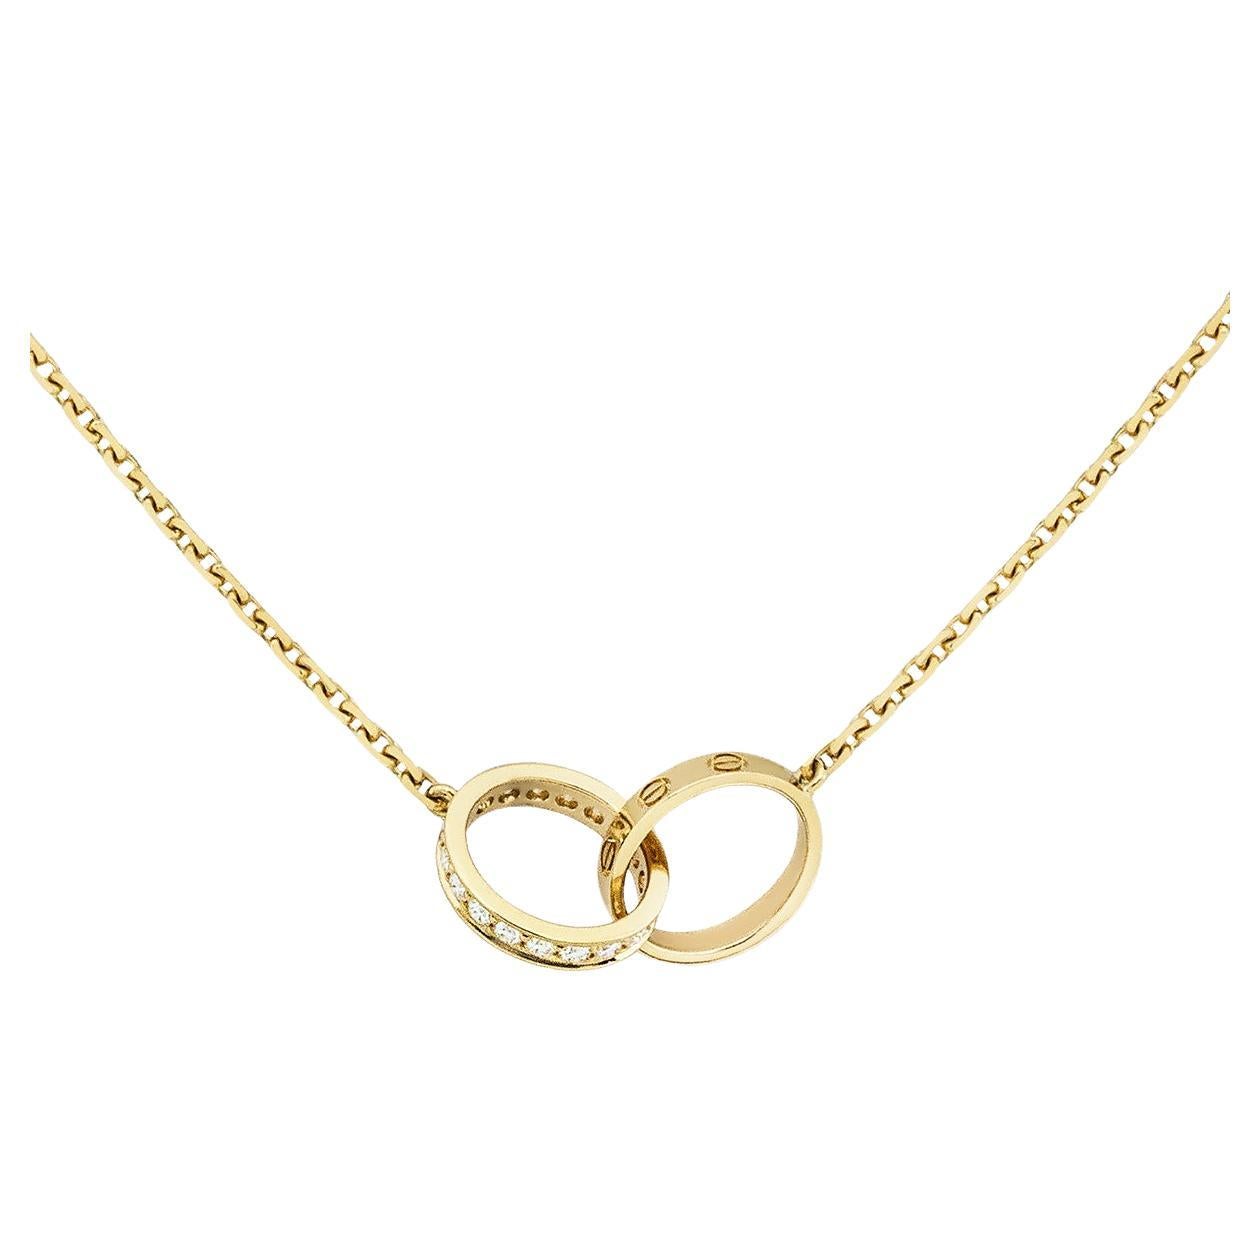 Cartier 18k Yellow Gold Diamond Love Necklace B7013800 For Sale